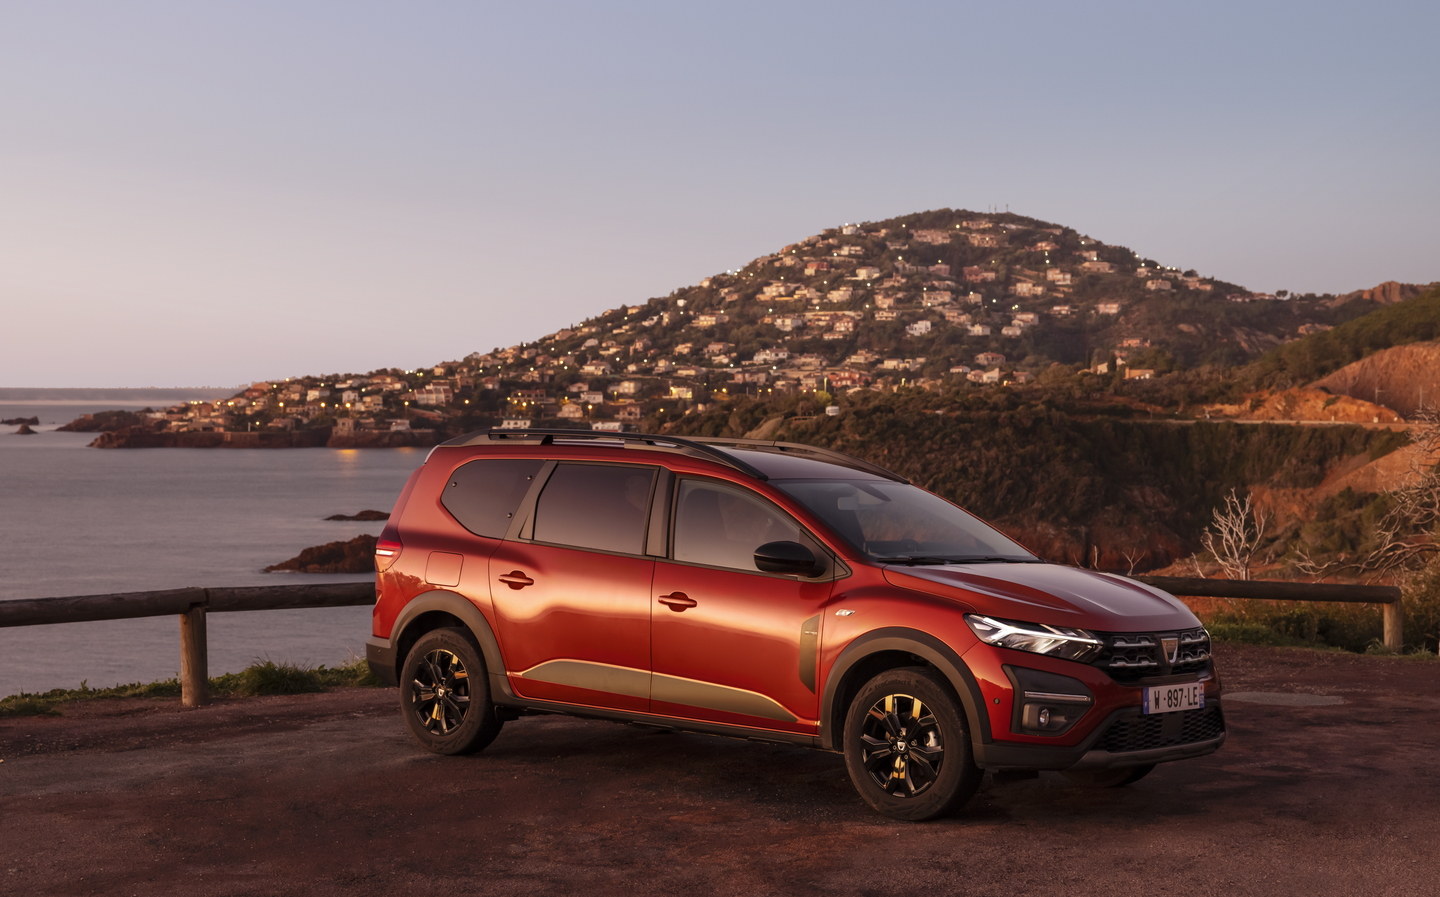 New 2022 Dacia Jogger is UK's cheapest seven-seater at £14,995